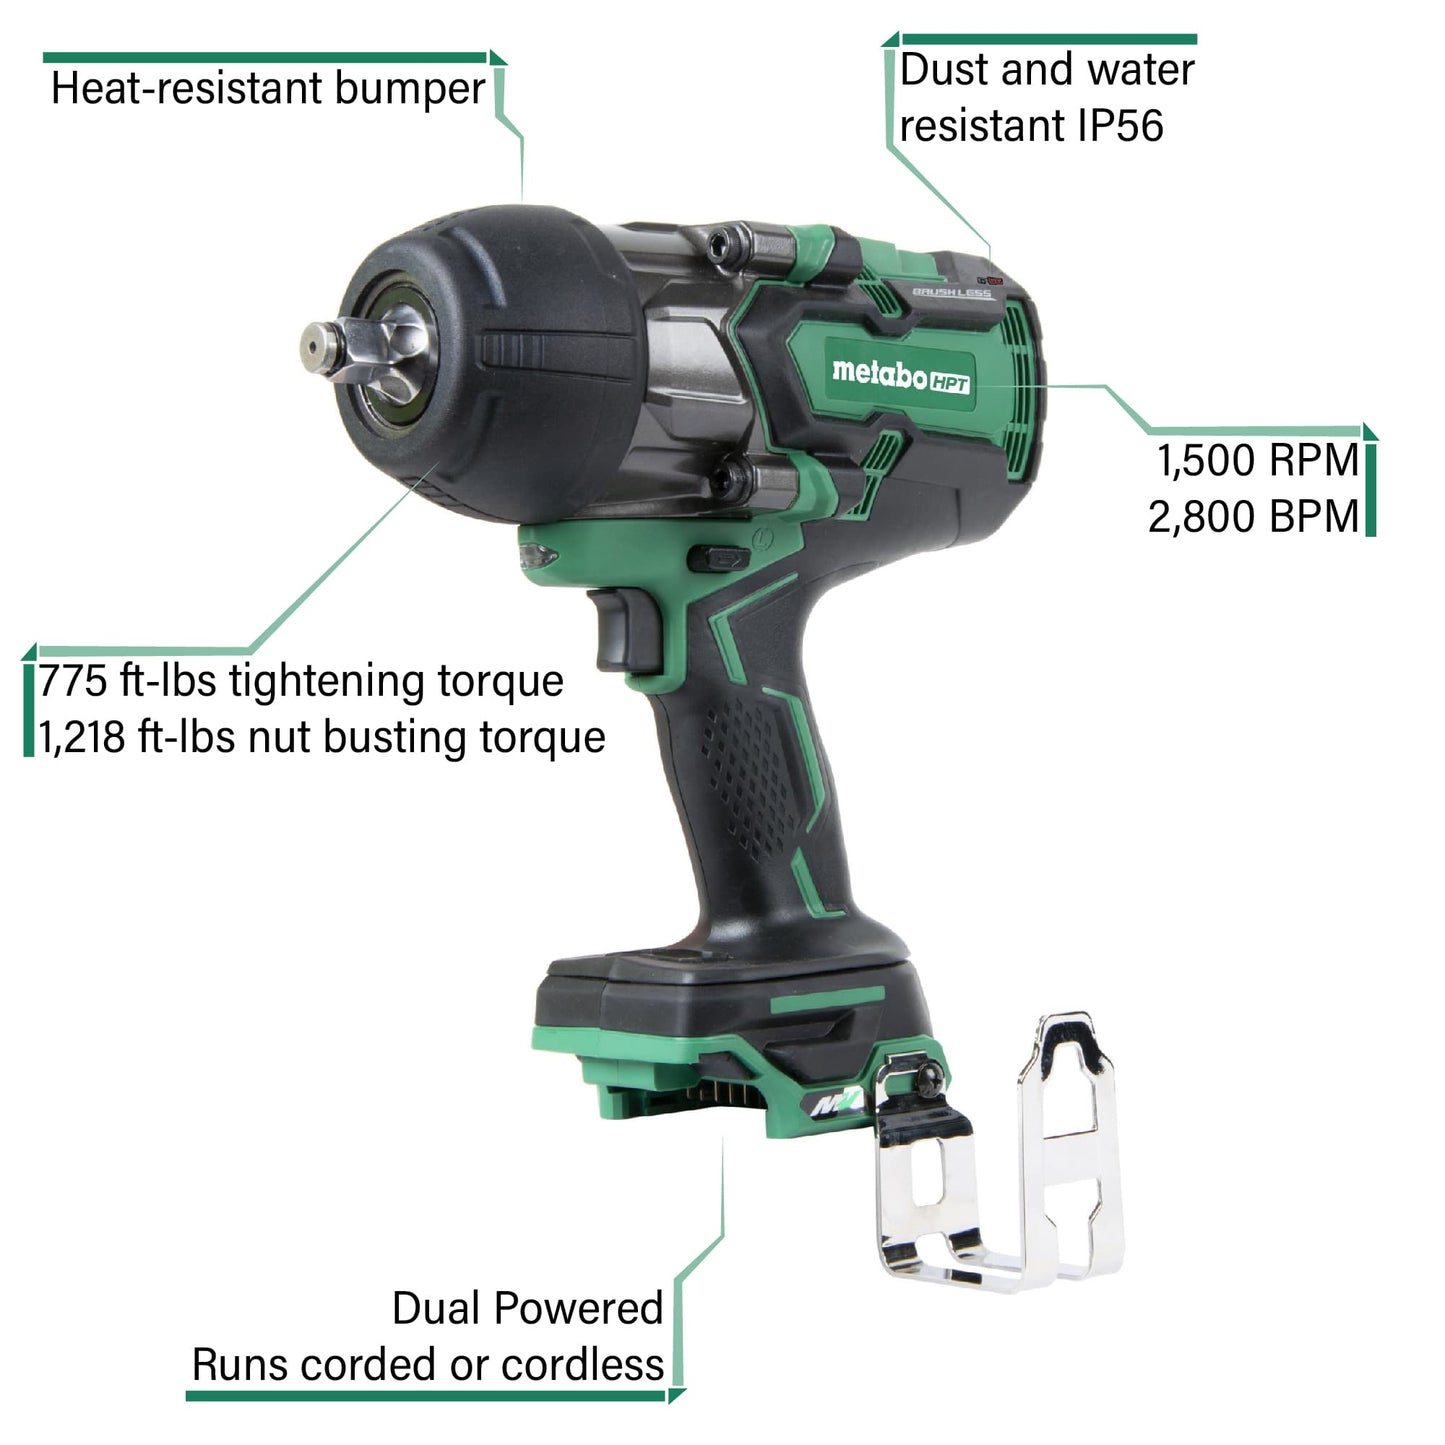 36 Volt Brushless 1/2-in Impact Wrench(Bare)-WR36DBQ4M